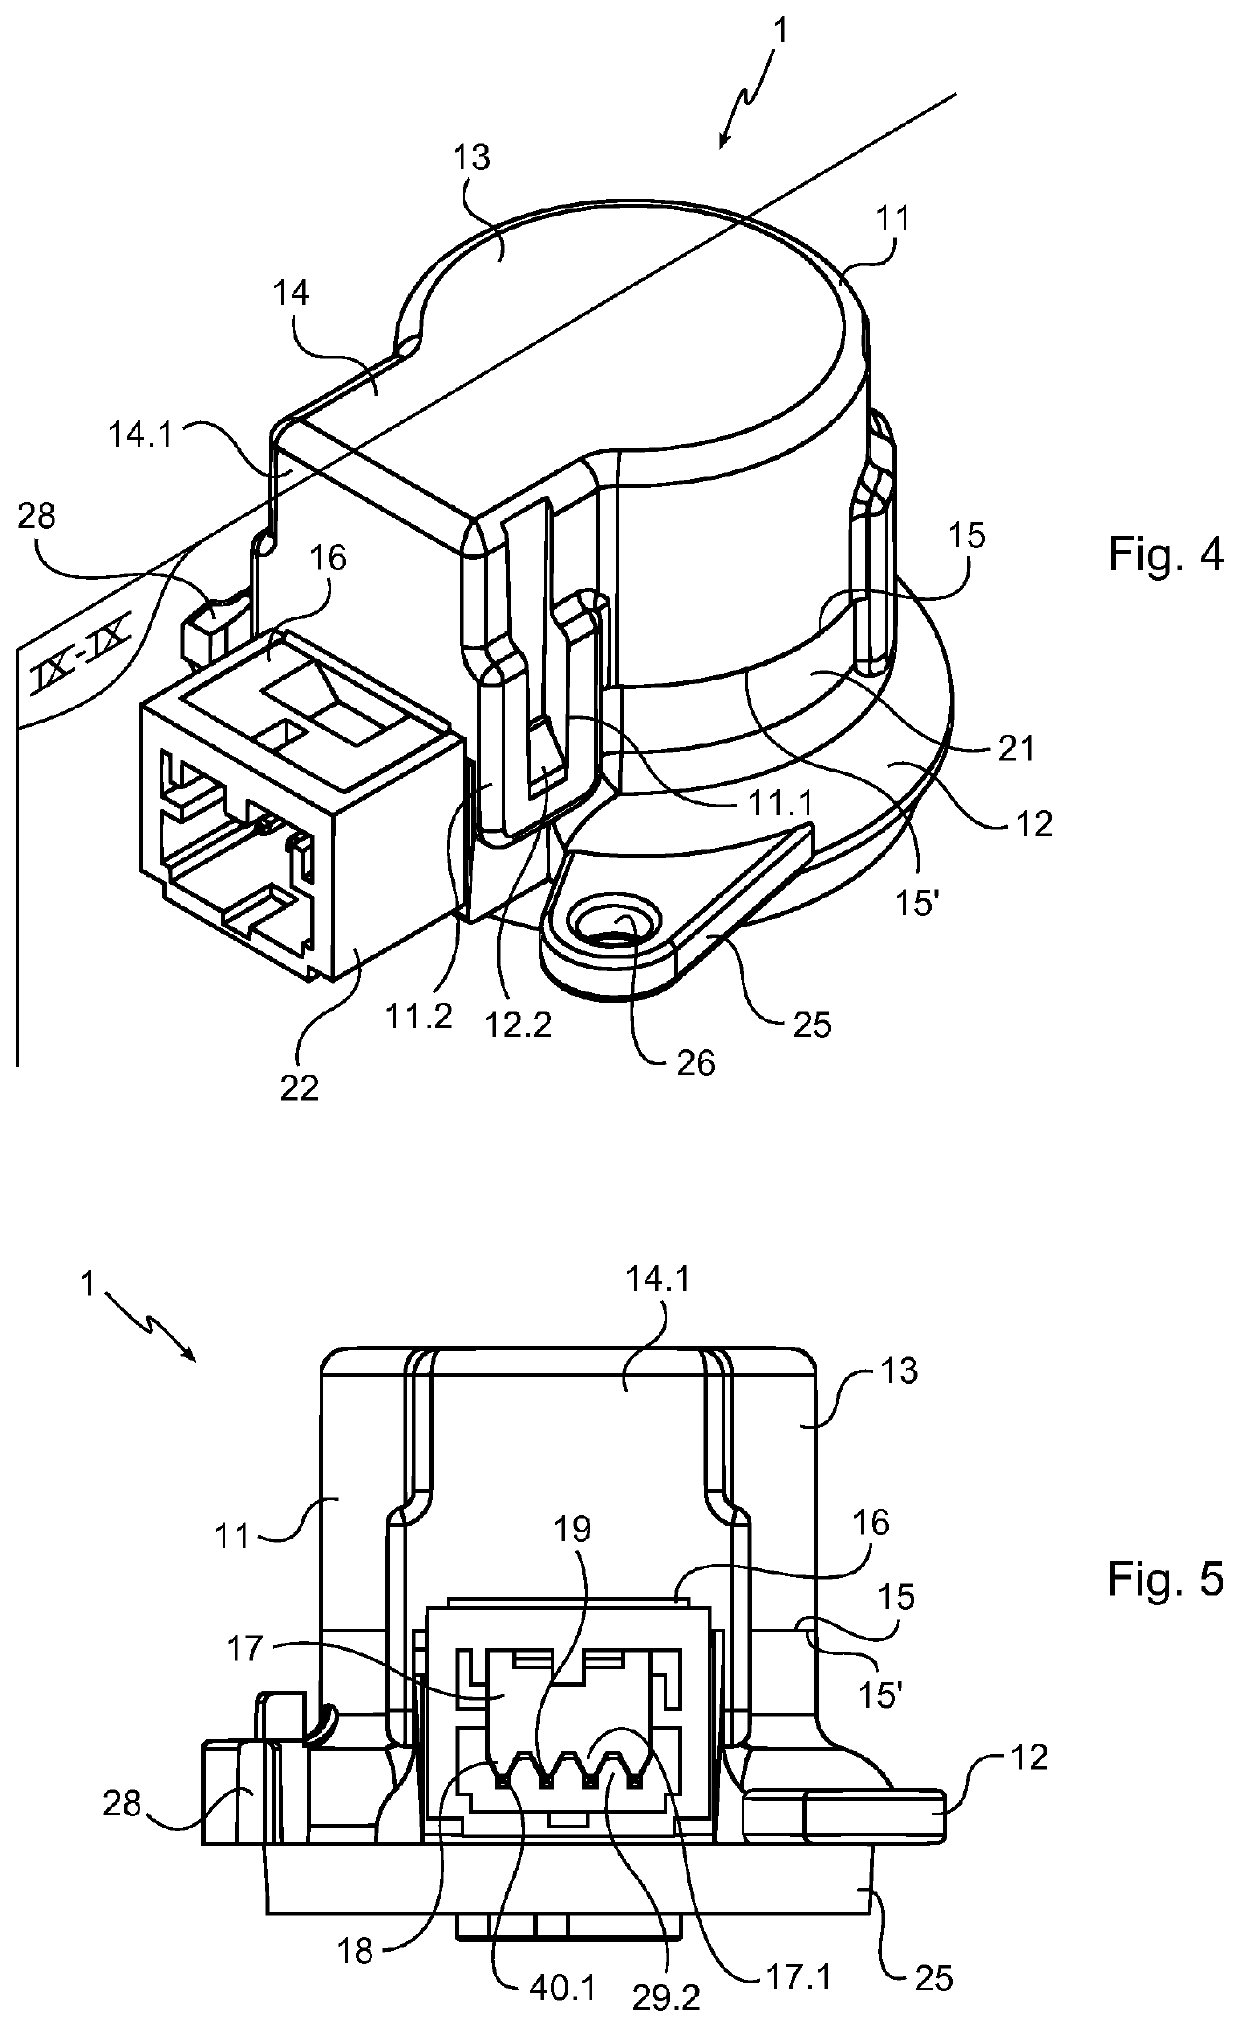 Actuator having reduced dimensions and integrated locking of the motor with respect to the housing